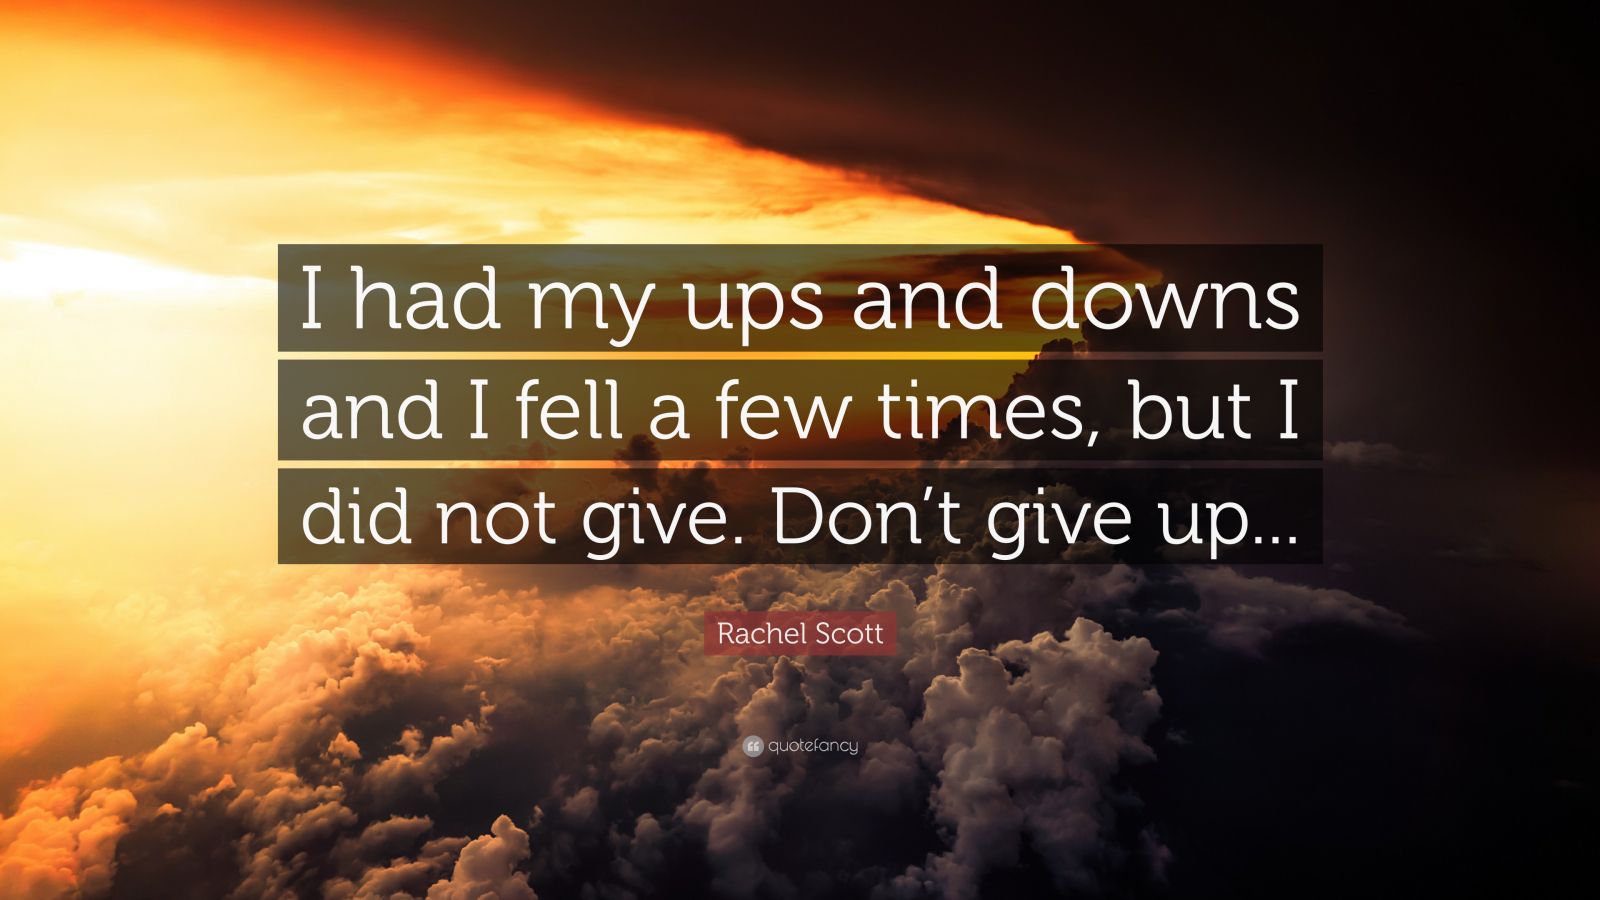 Rachel Scott Quote: “I had my ups and downs and I fell a few times, but ...